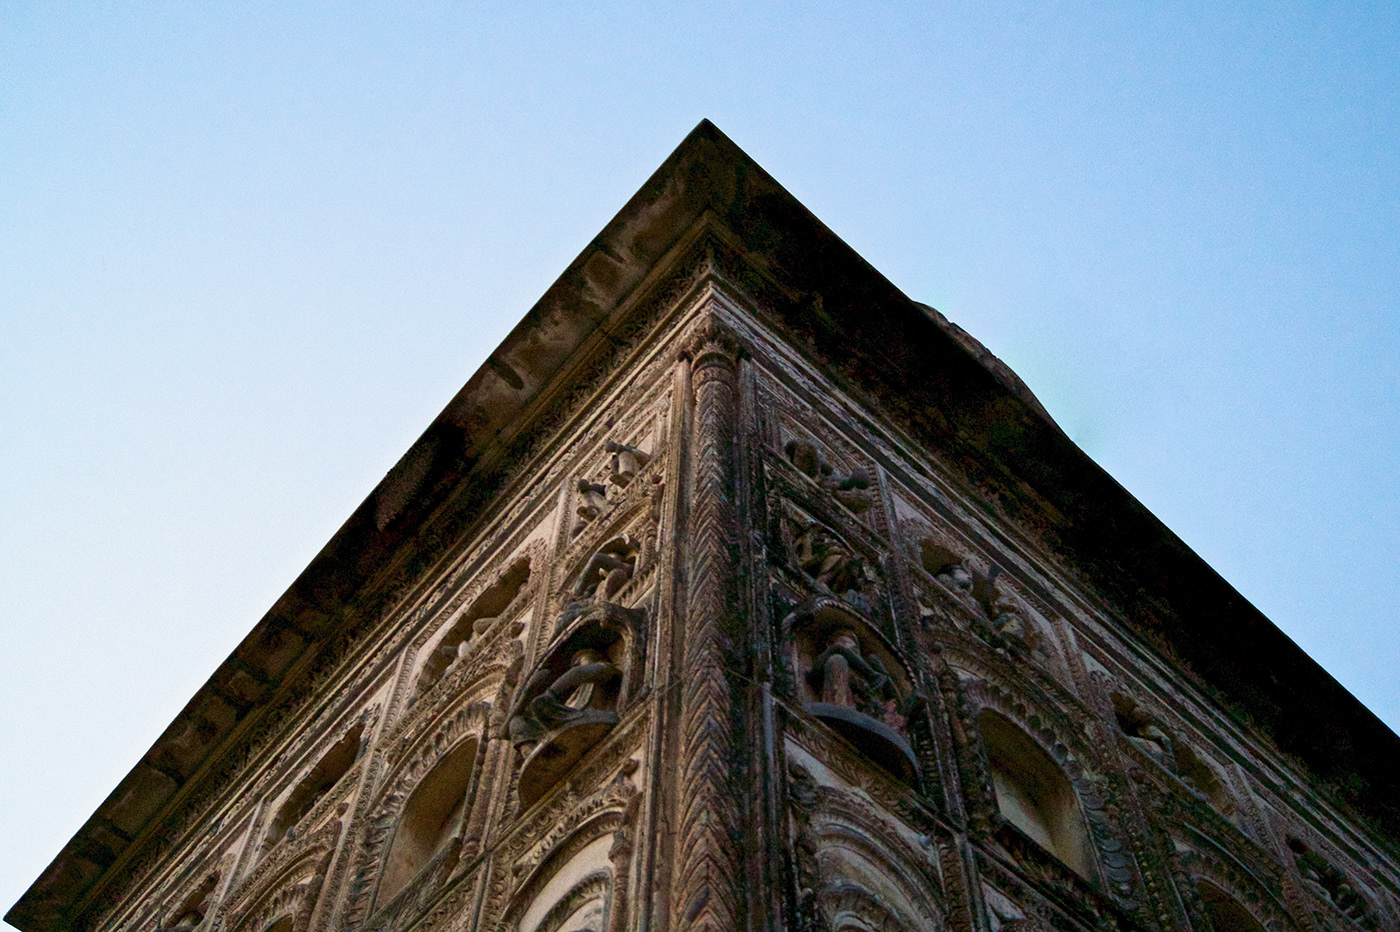 architectural photography architecture heritage Incredible India India monuments Photography 